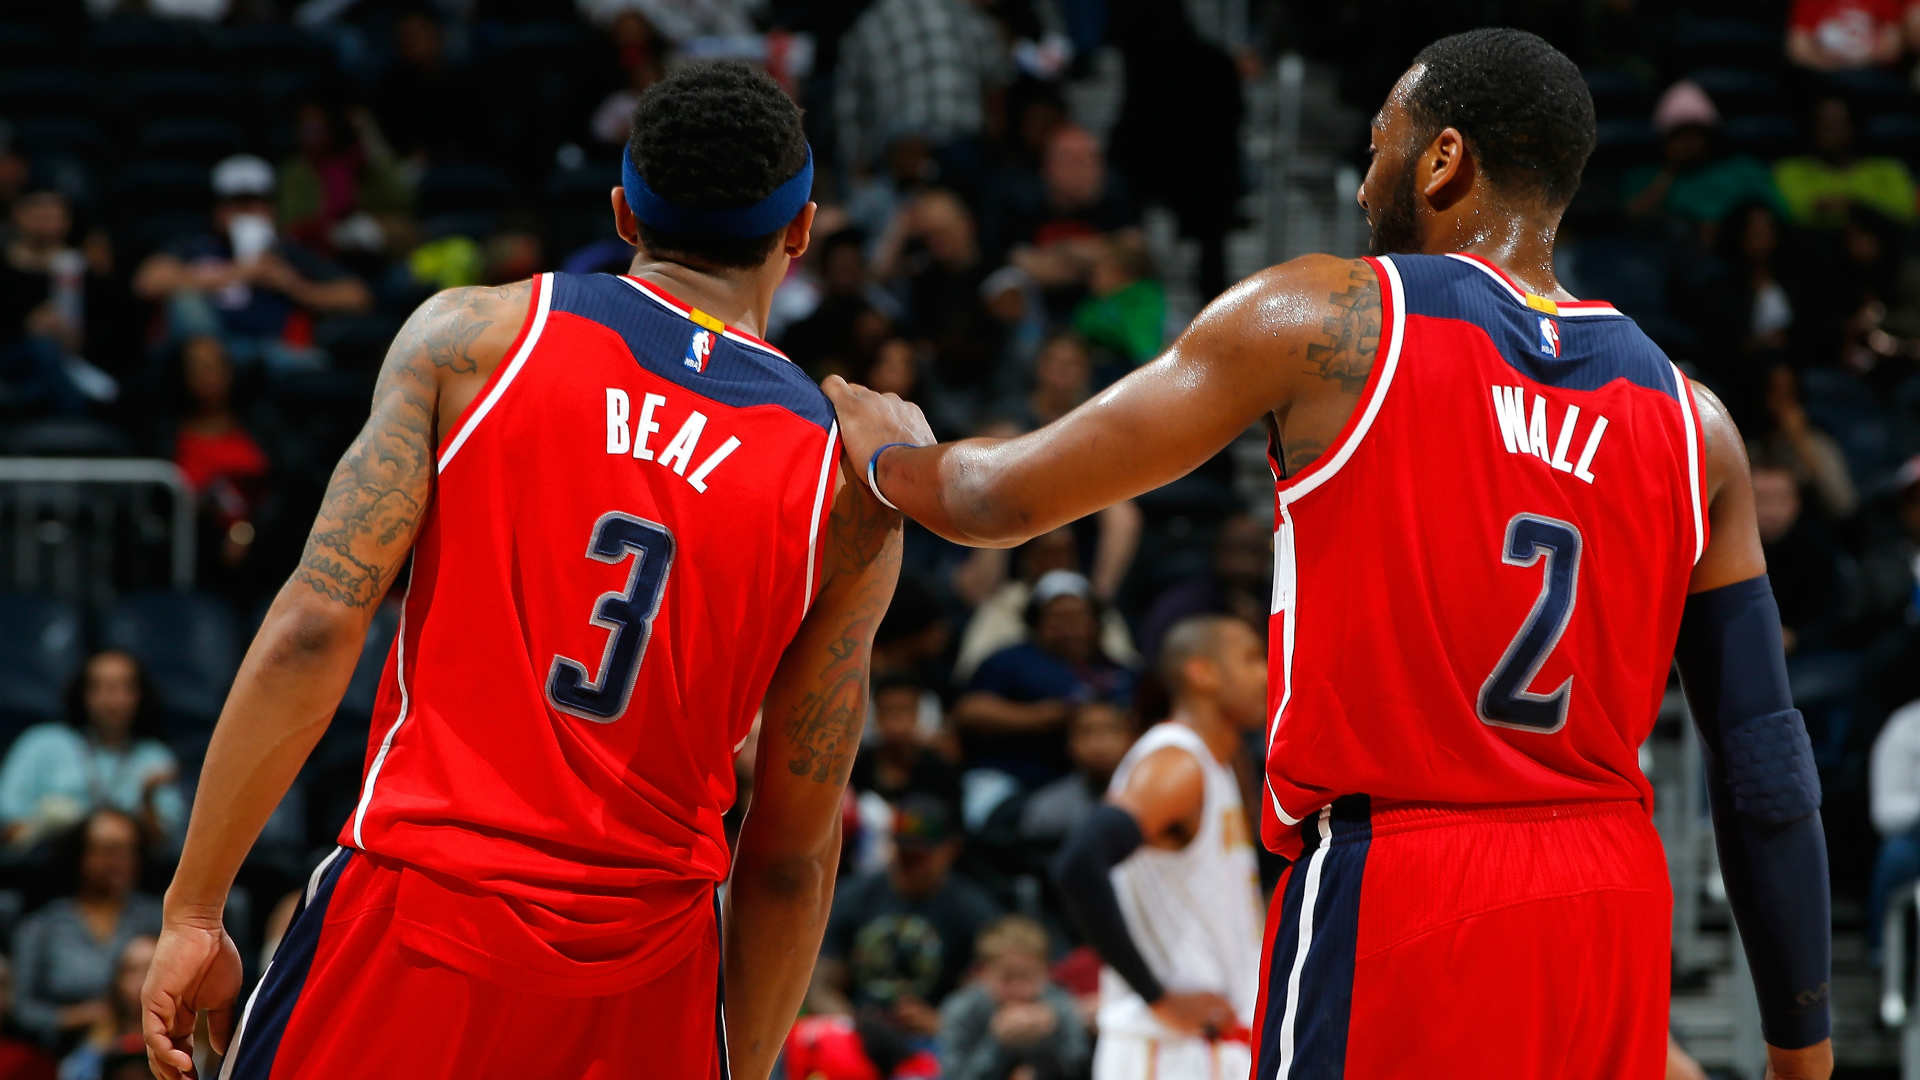 1920x1080 Bradley Beal says he and John Wall should've had better year for Wizards |  NBA | Sporting News